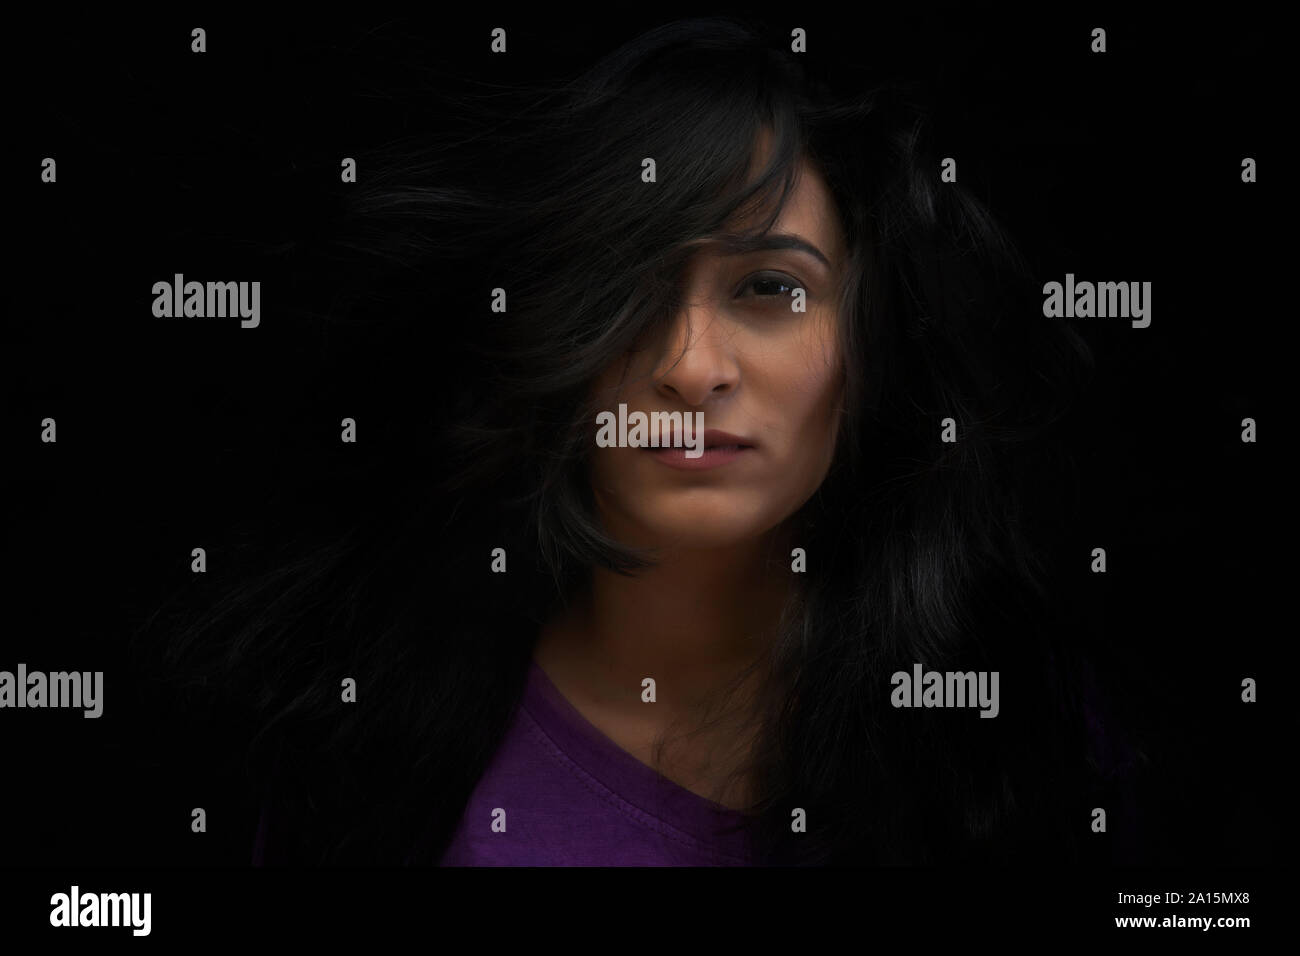 Portrait of young woman with dishevelled hair over black background Stock Photo